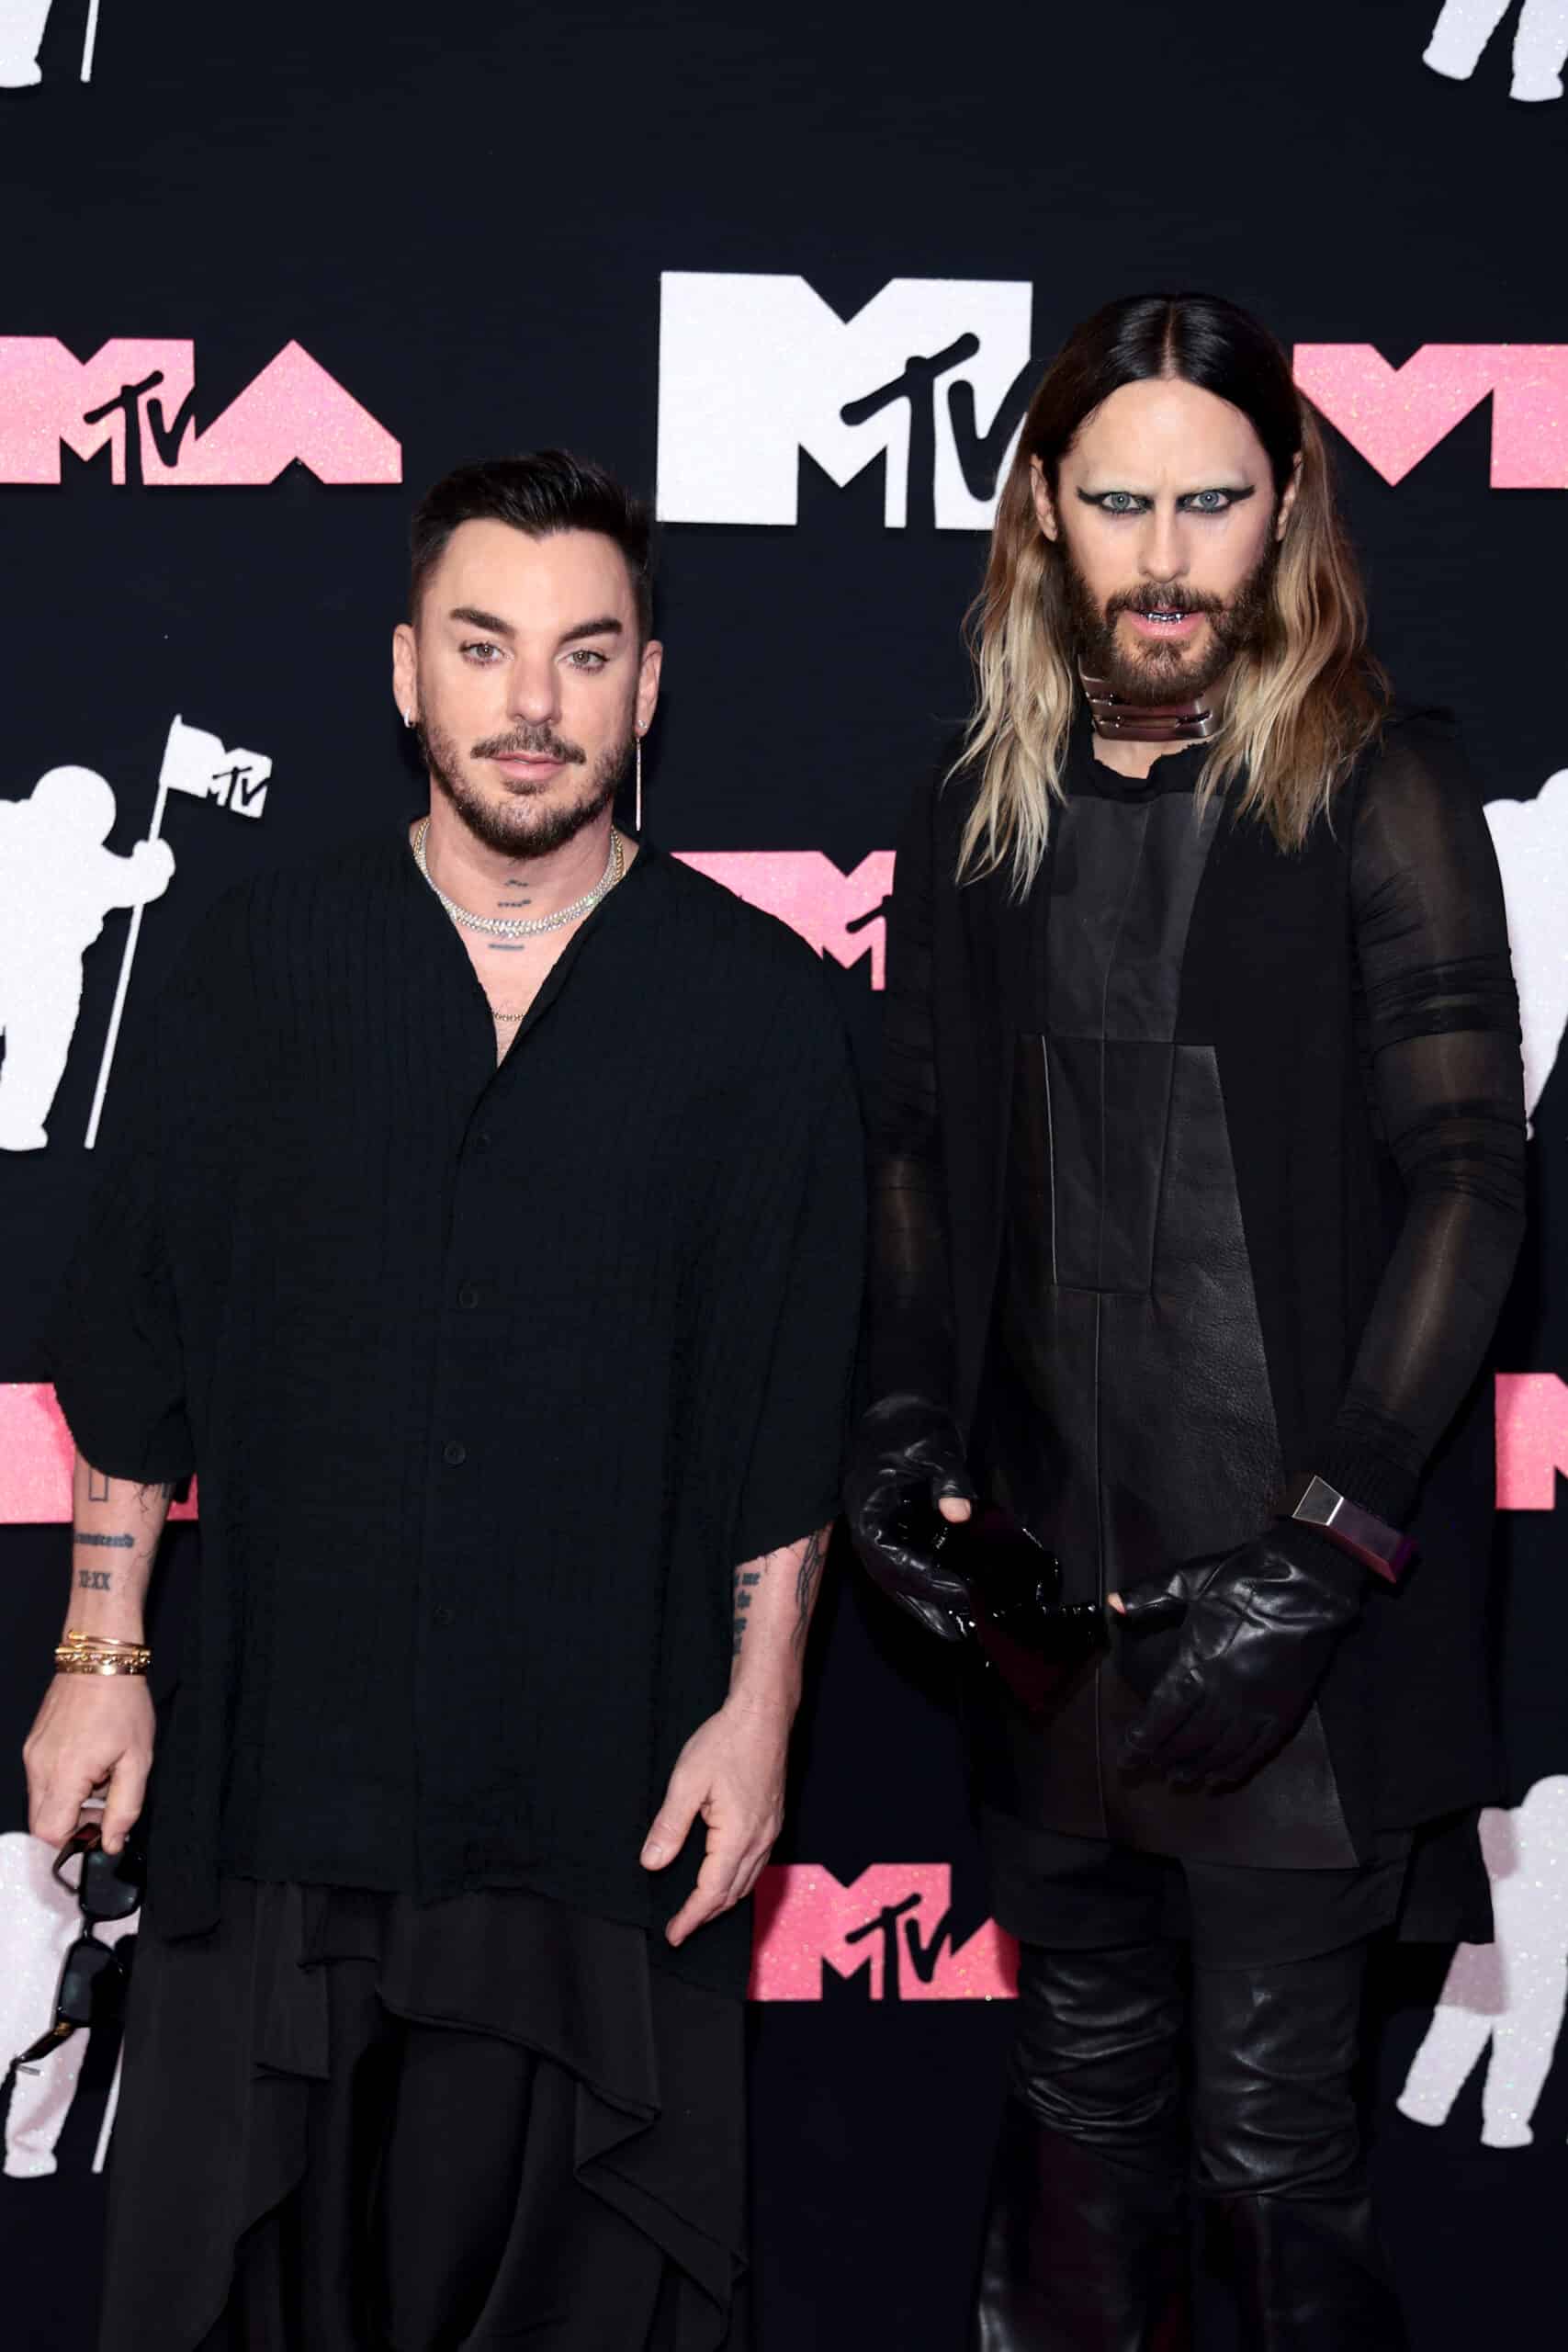 NEWARK, NEW JERSEY - SEPTEMBER 12: (L-R) Shannon Leto and Jared Leto of Thirty Seconds to Mars attend the 2023 MTV Video Music Awards at the Prudential Center on September 12, 2023 in Newark, New Jersey. 